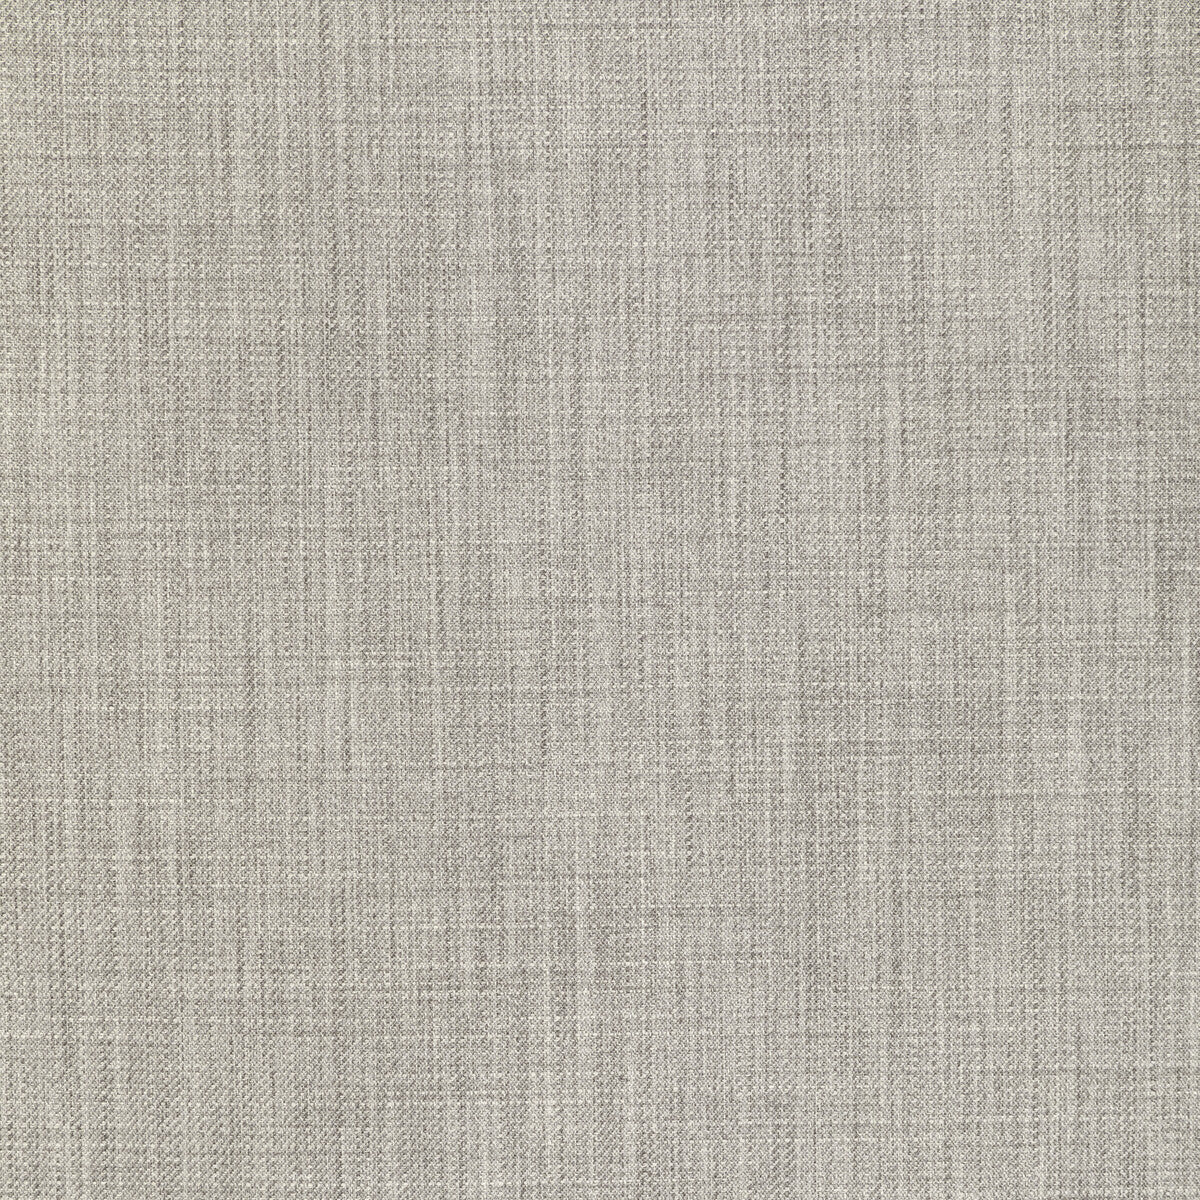 Kravet Smart fabric in 36293-11 color - pattern 36293.11.0 - by Kravet Smart in the Performance Crypton Home collection